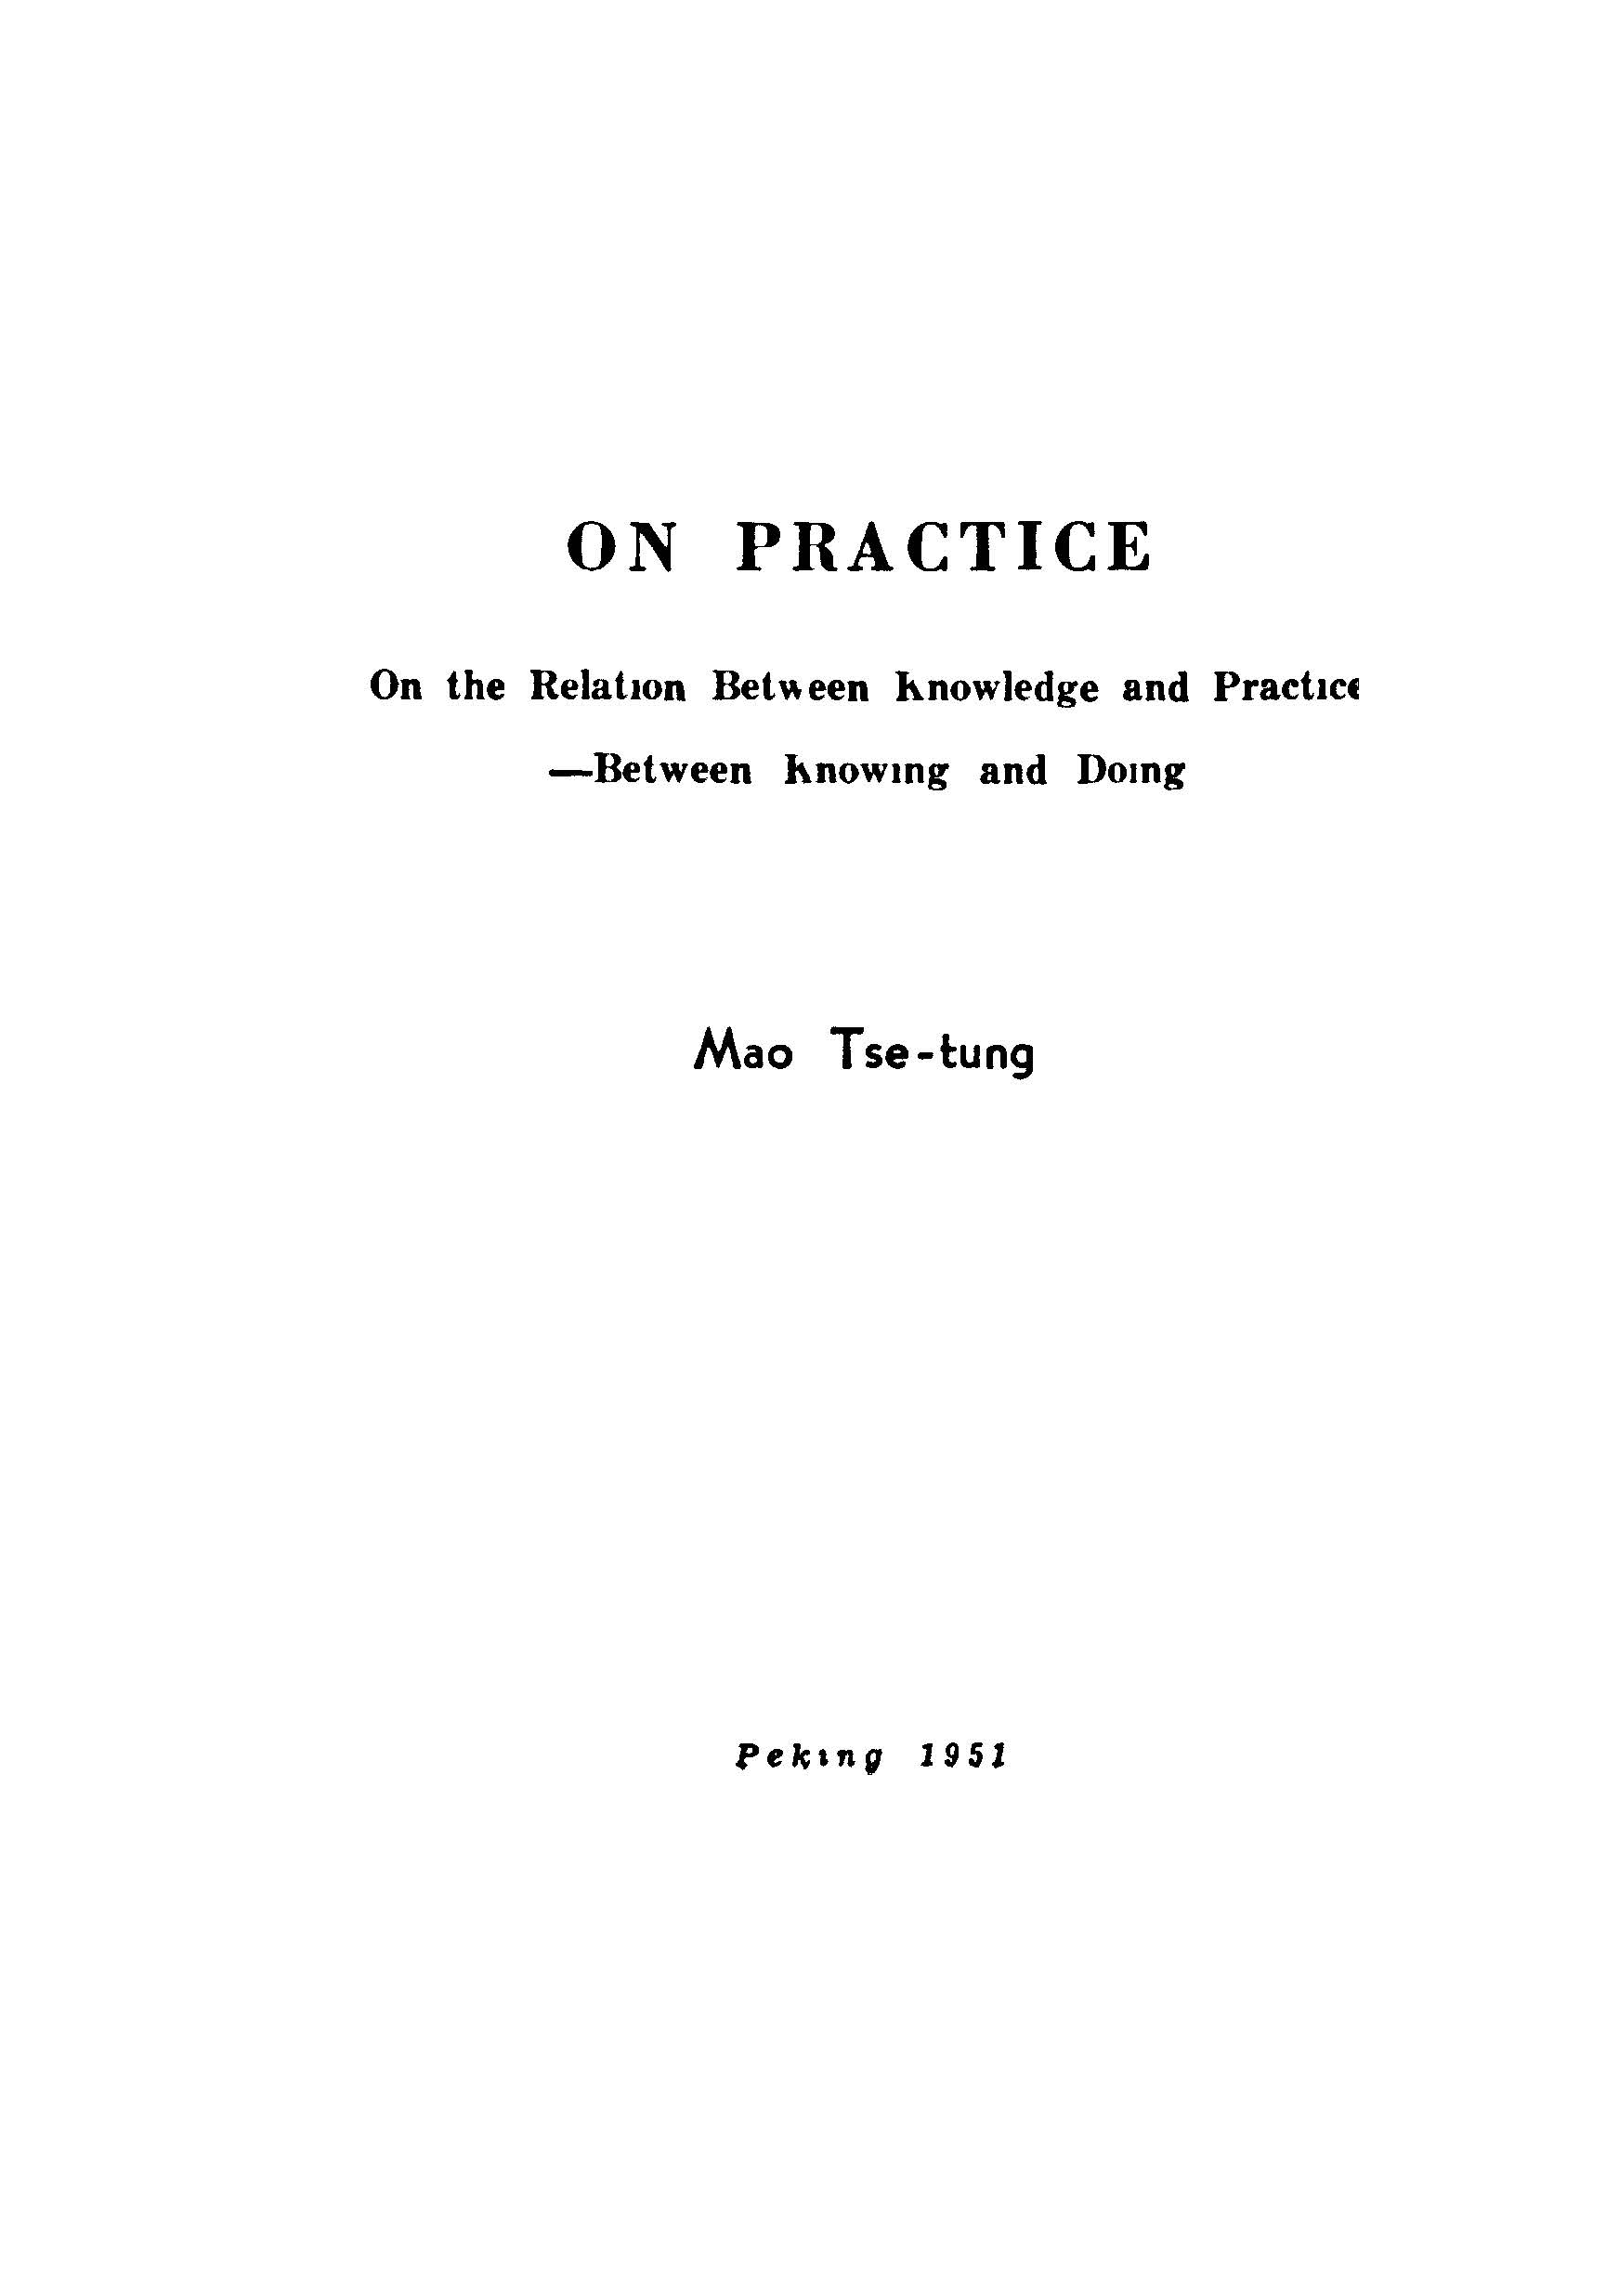 On Practice On the Relation Between Knowledge and Practicebetween Knowing and doing